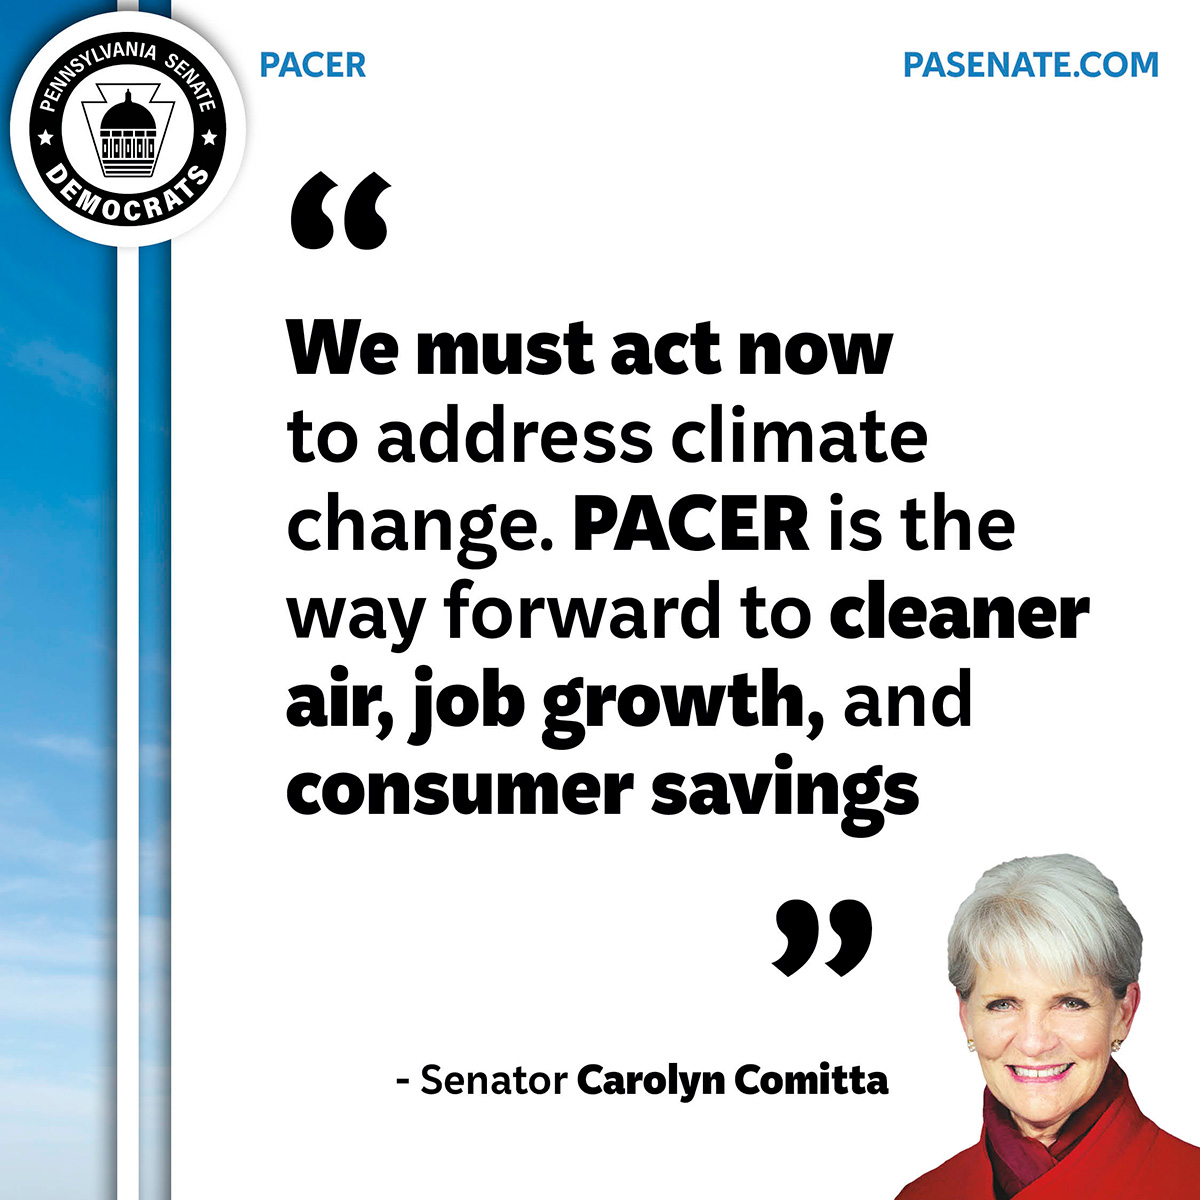 We must act now to address climate change. PACER is the way forward to cleaner air, job growth, and consumer savings.